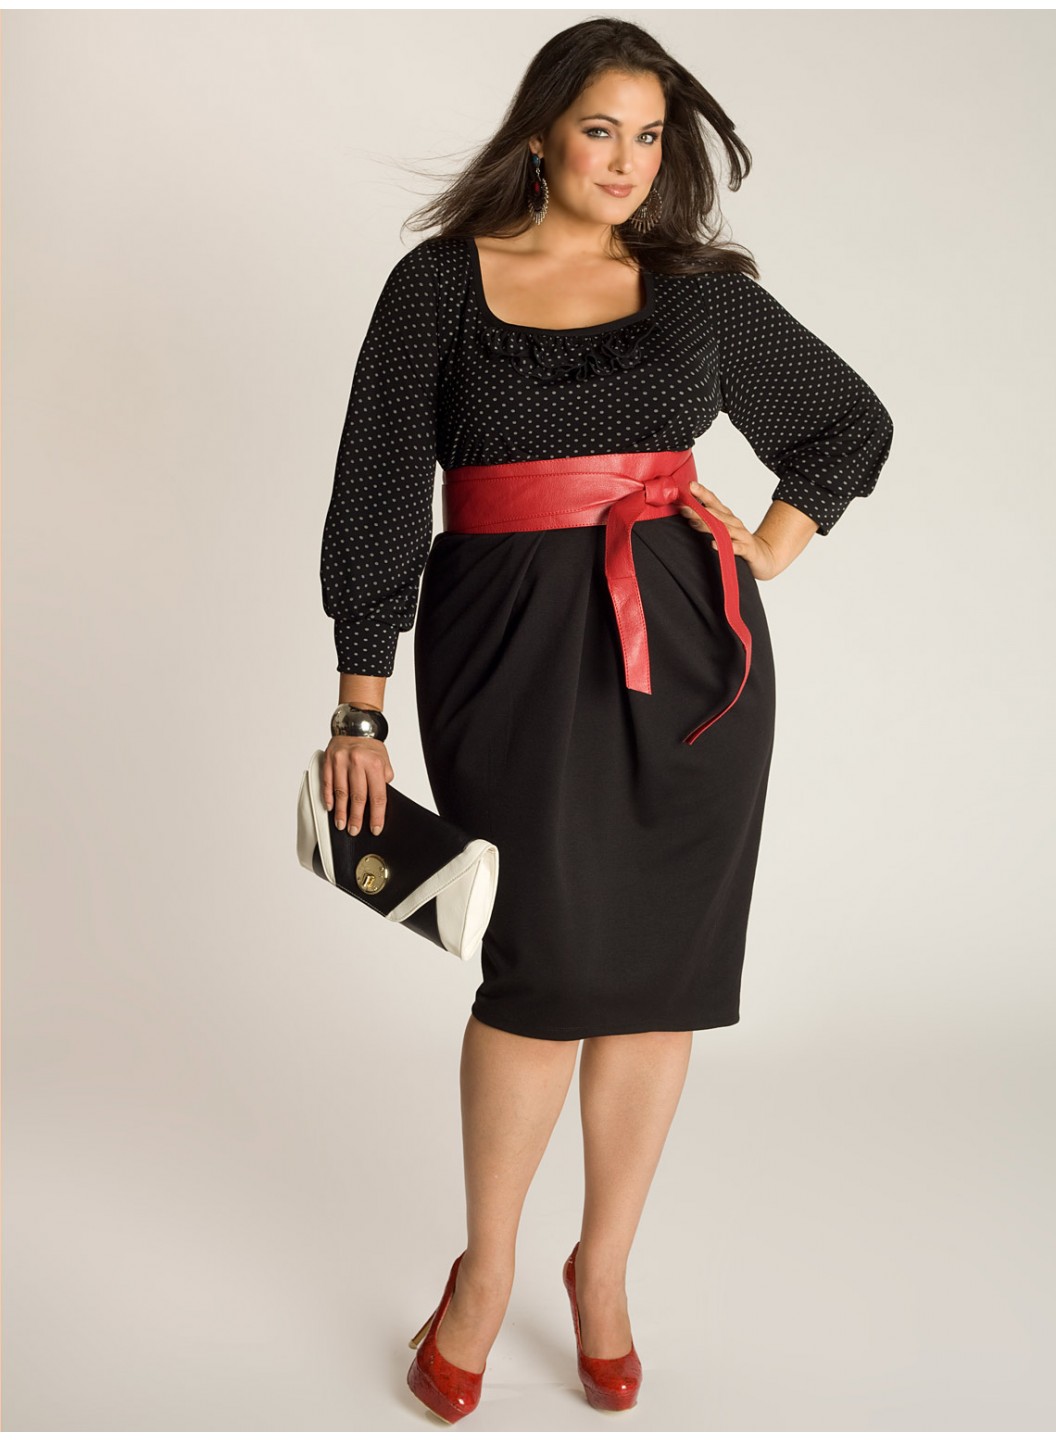 33 Plus Size Dresses For 2015 – The WoW Style